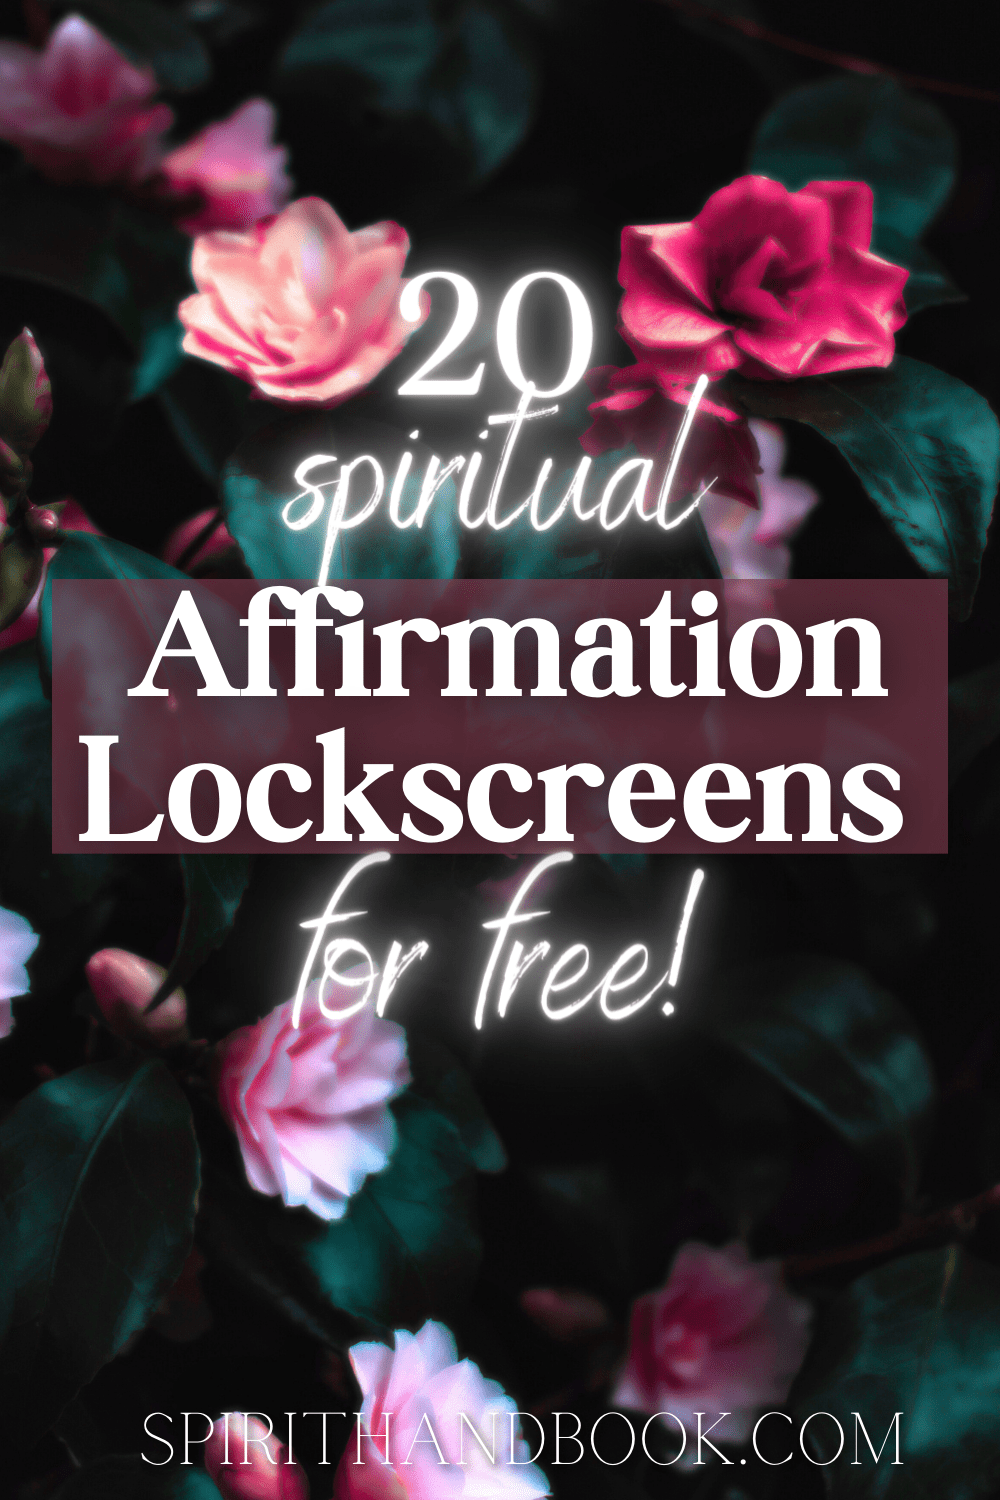 You are currently viewing 20 beautiful Affirmation Lockscreens for Your Smartphone!